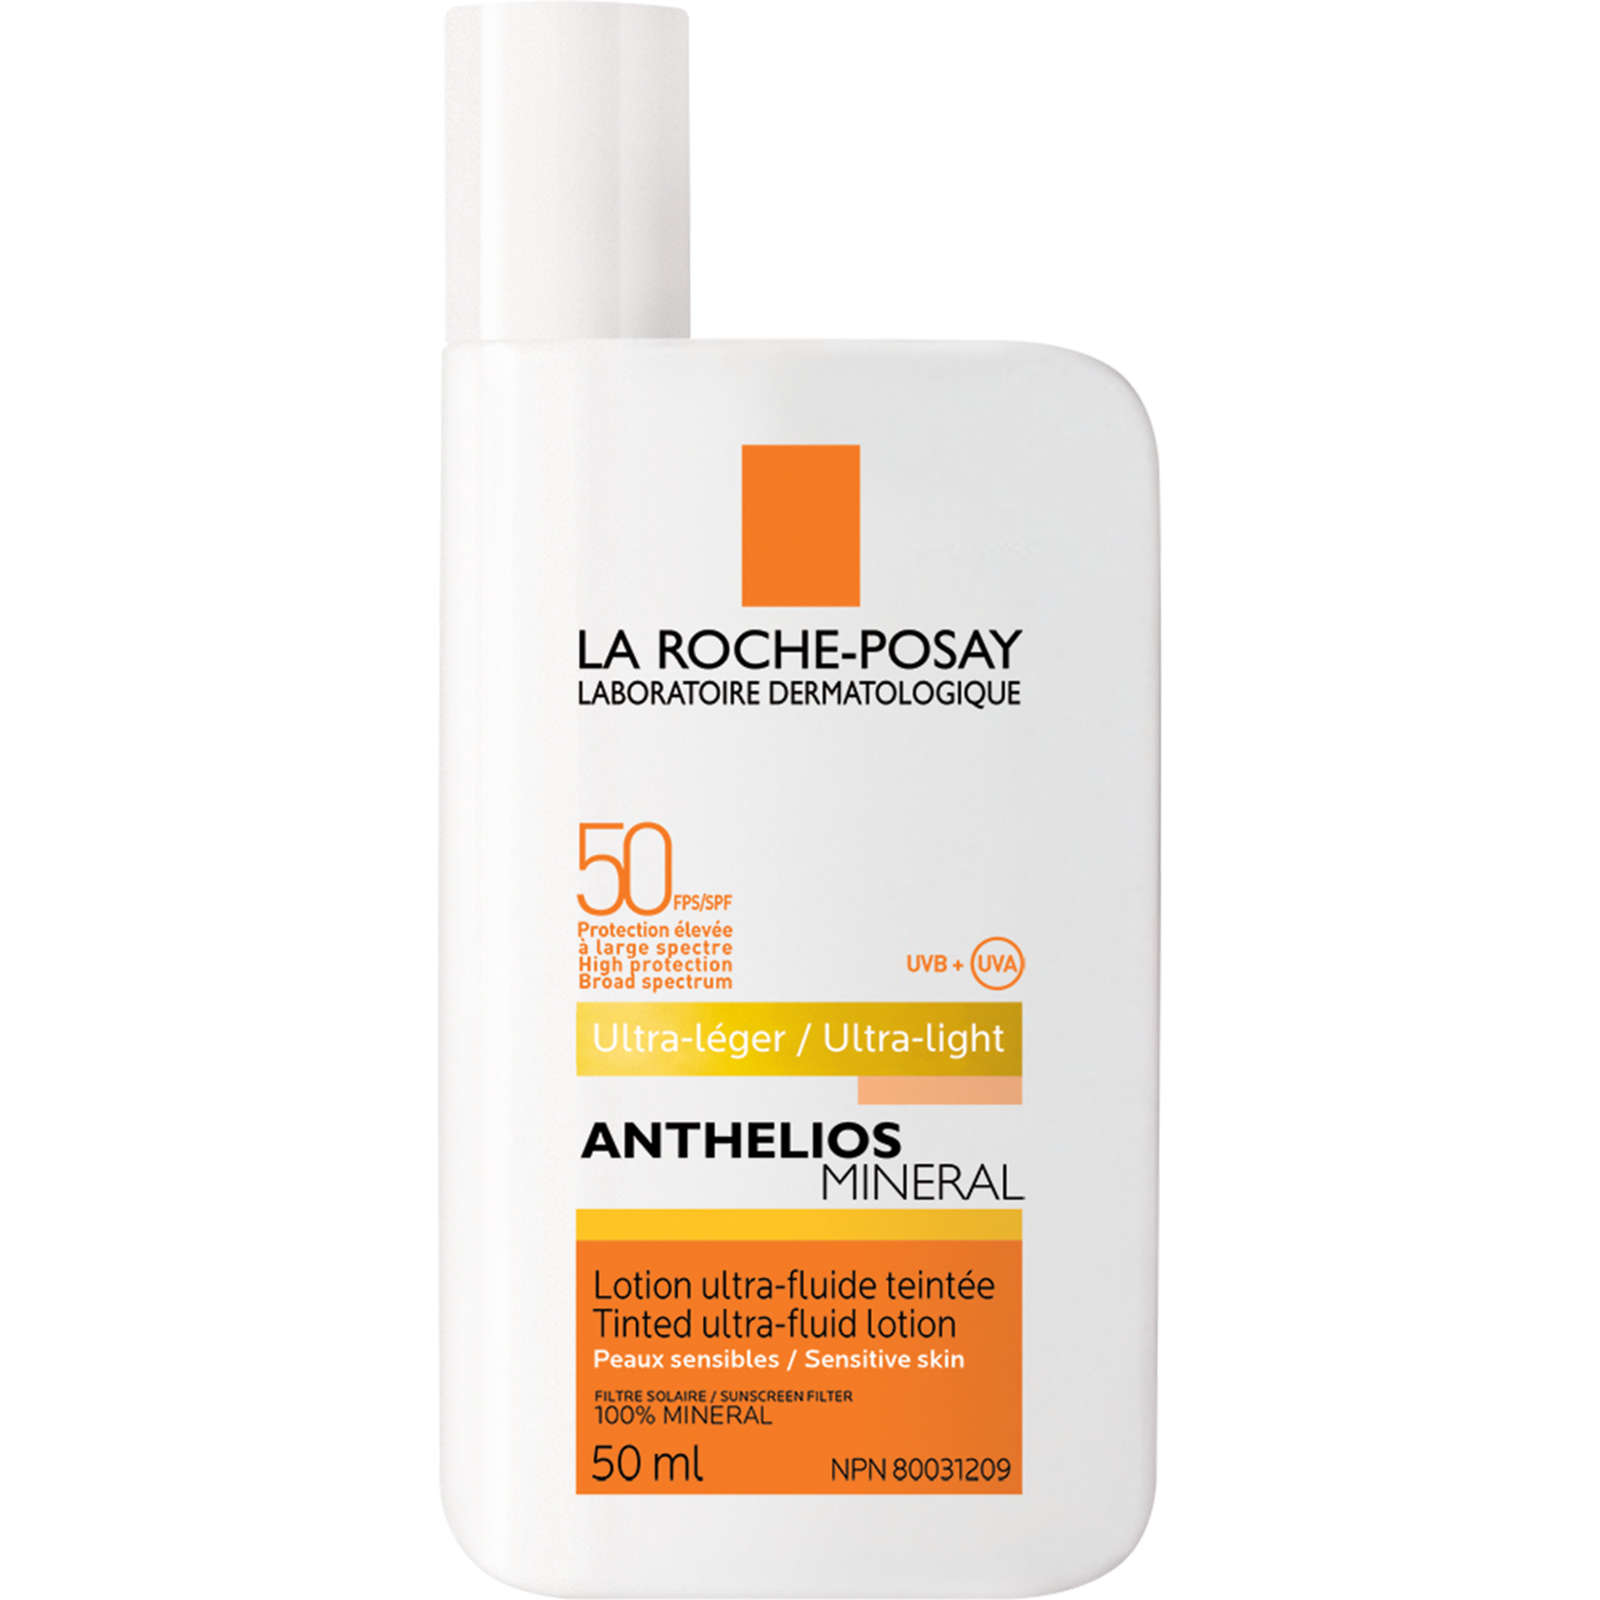 La Roche-Posay - Anthelios Mineral Tinted Ultra-Fluid Face Sunscreen Lotion SPF50 For Sensitive Skin